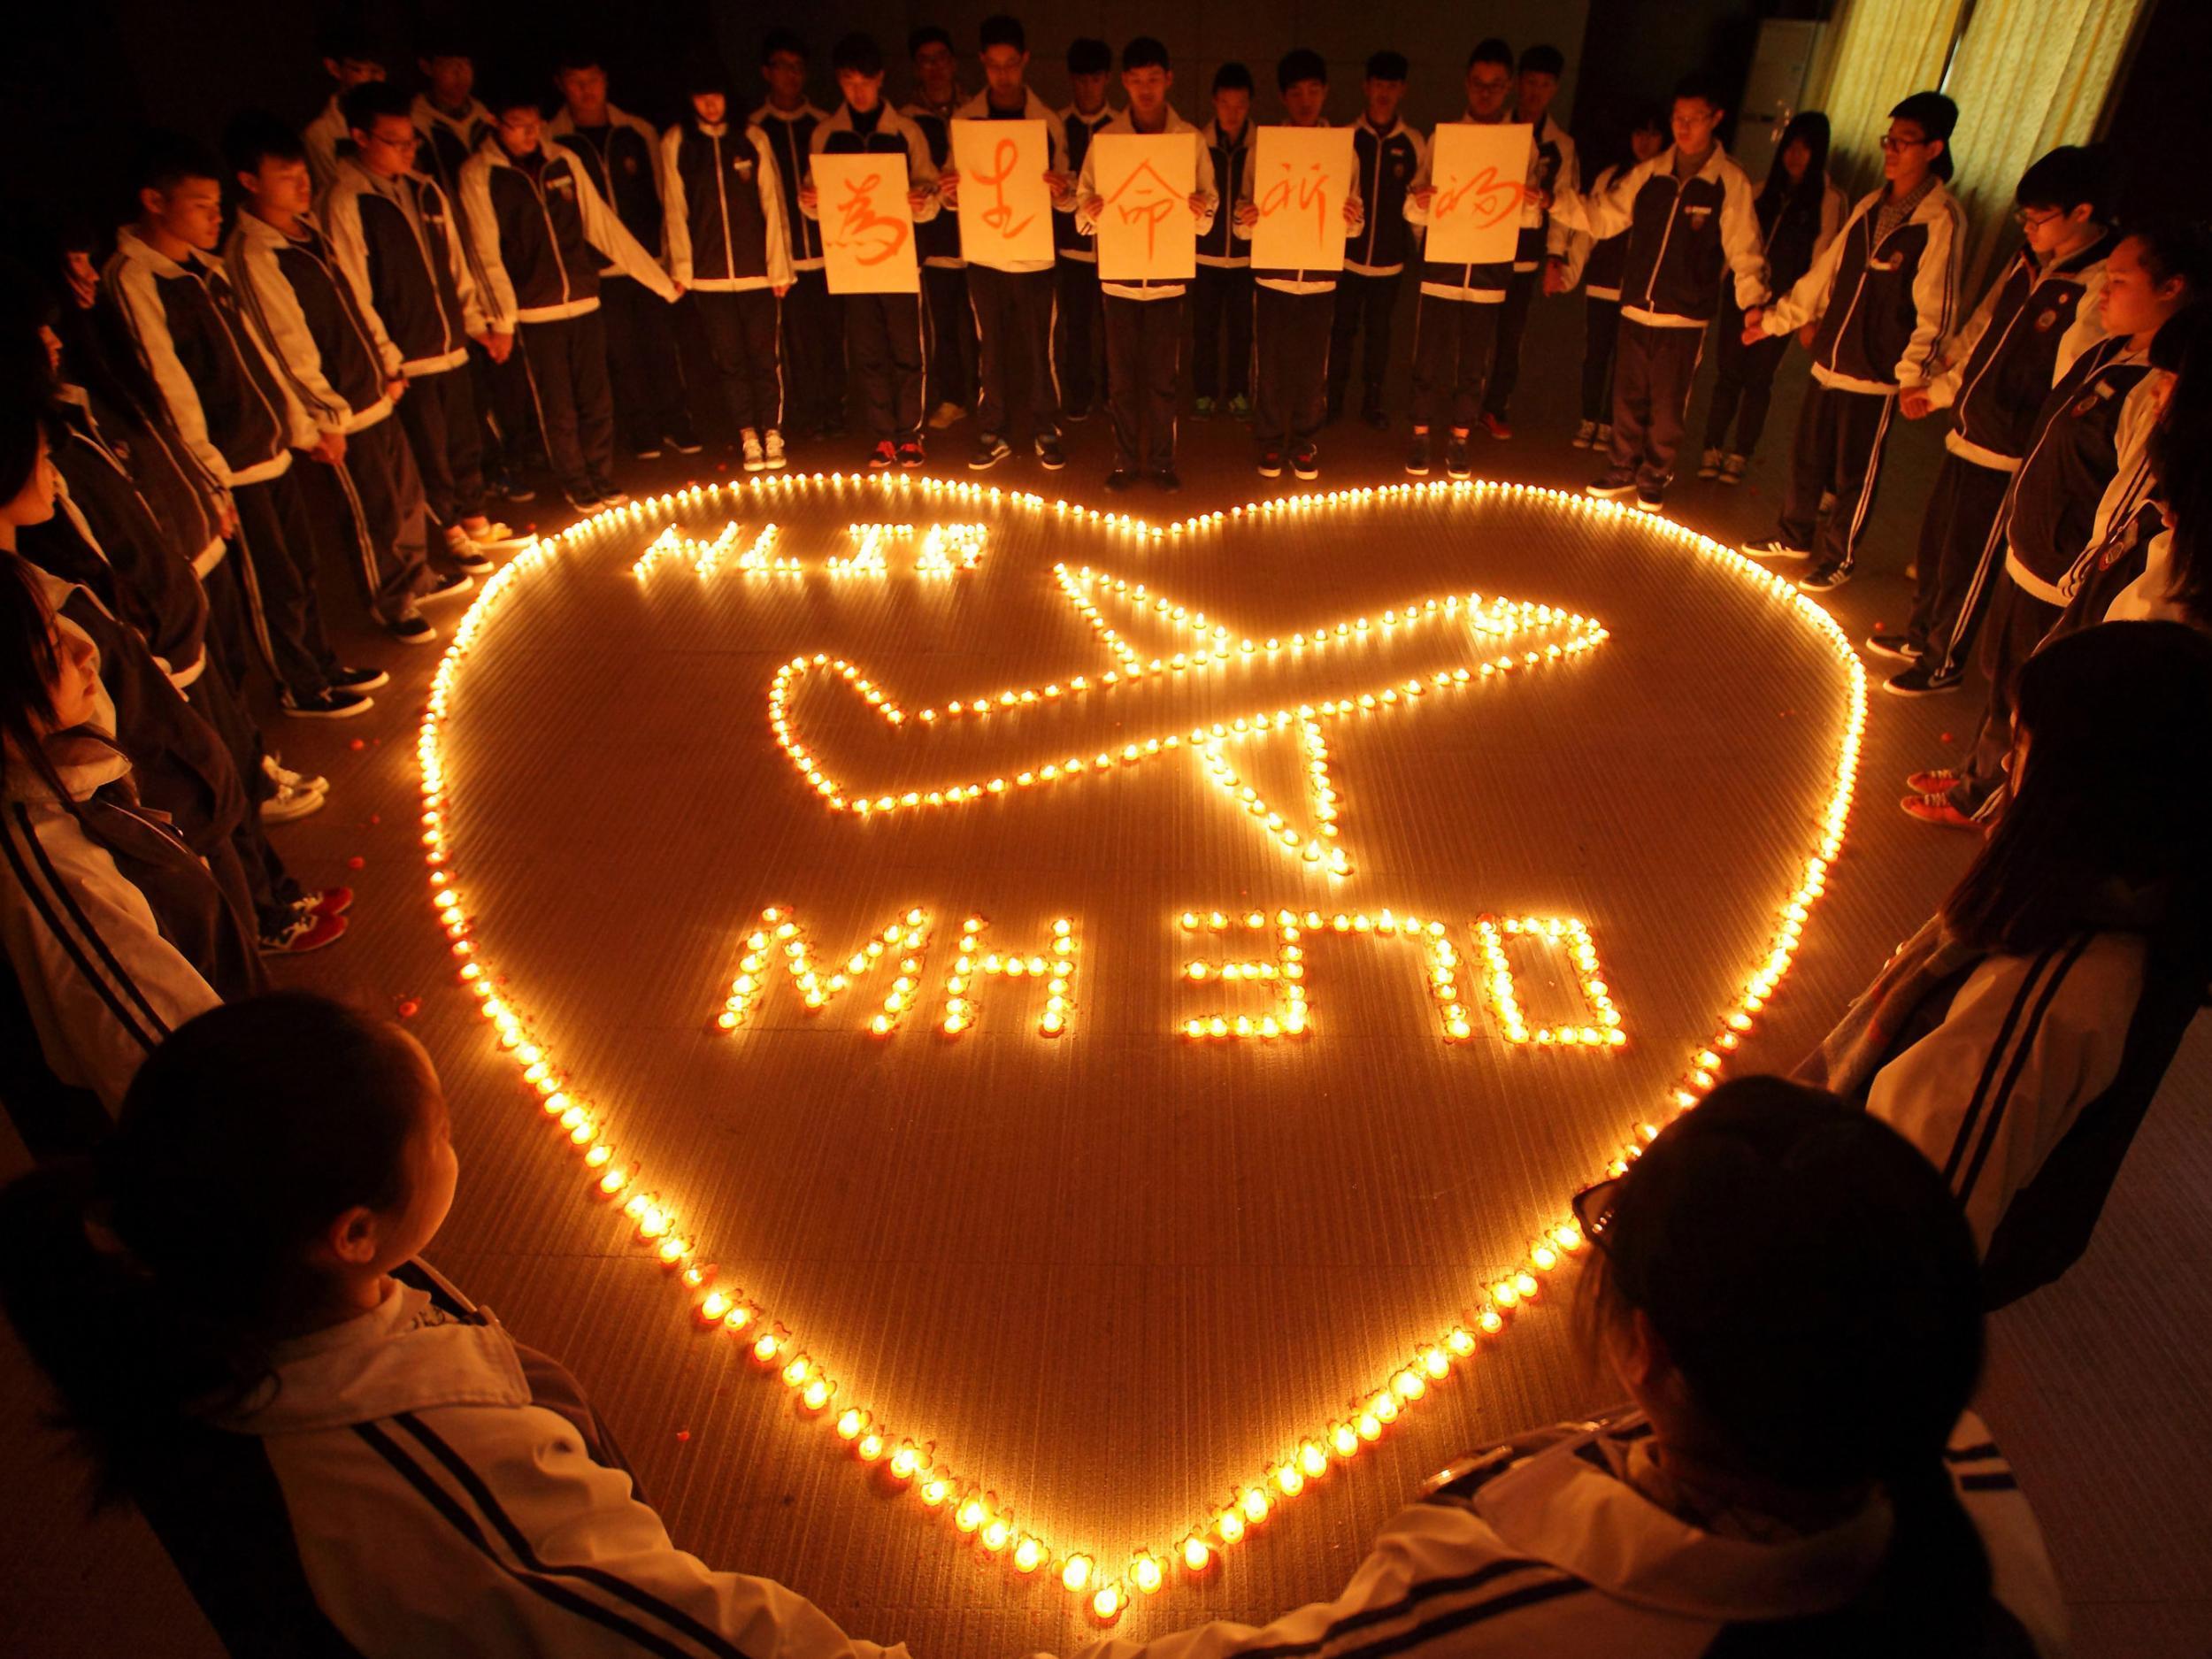 Students at Hailiang International School in Zhuji, China light candles for the passengers on the Malaysia Airlines MH370 flight, just a few days after the aircraft went missing in 2014